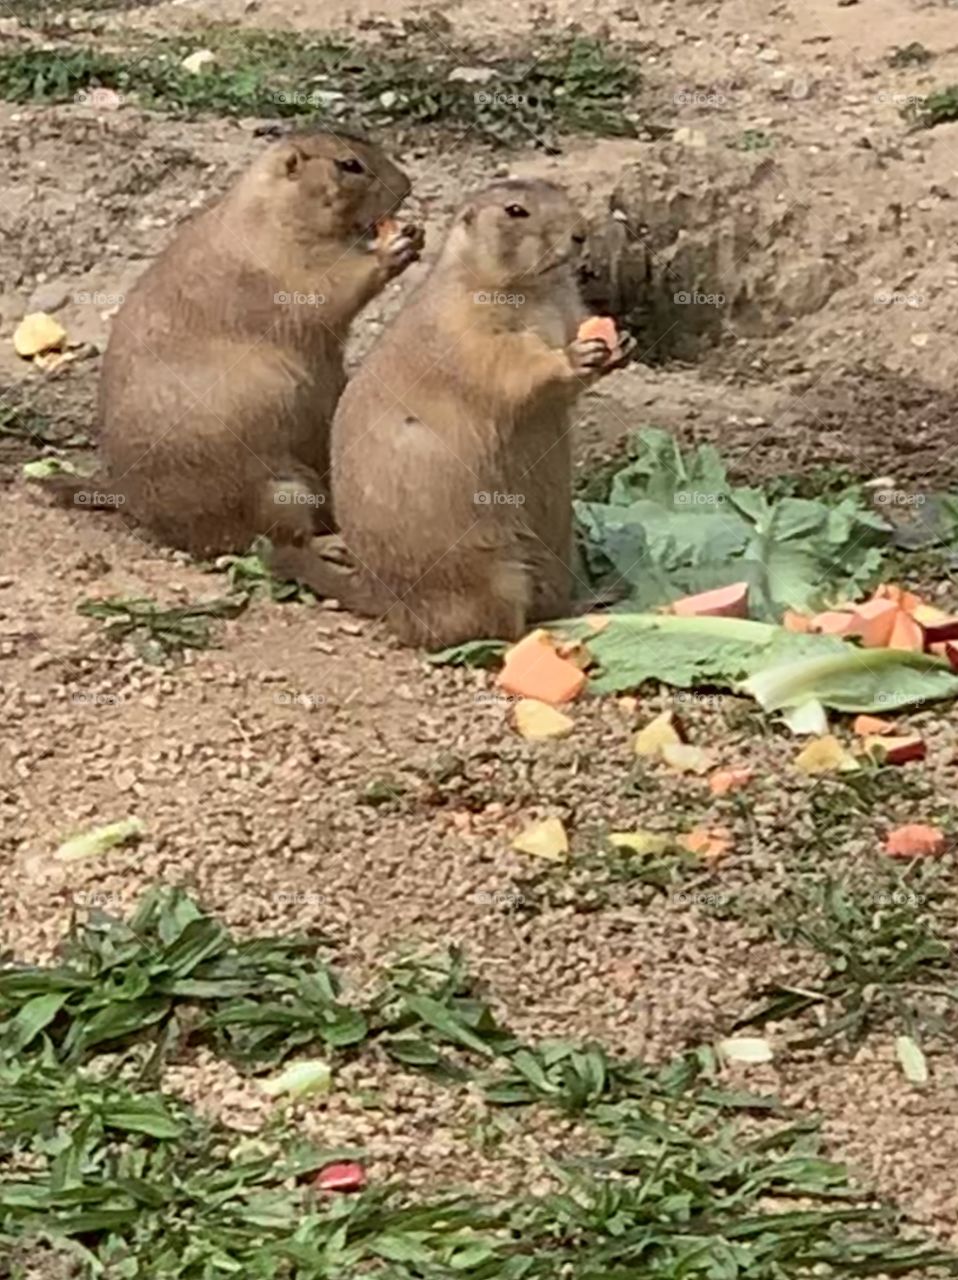 Adorable prairie dogs at the zoo